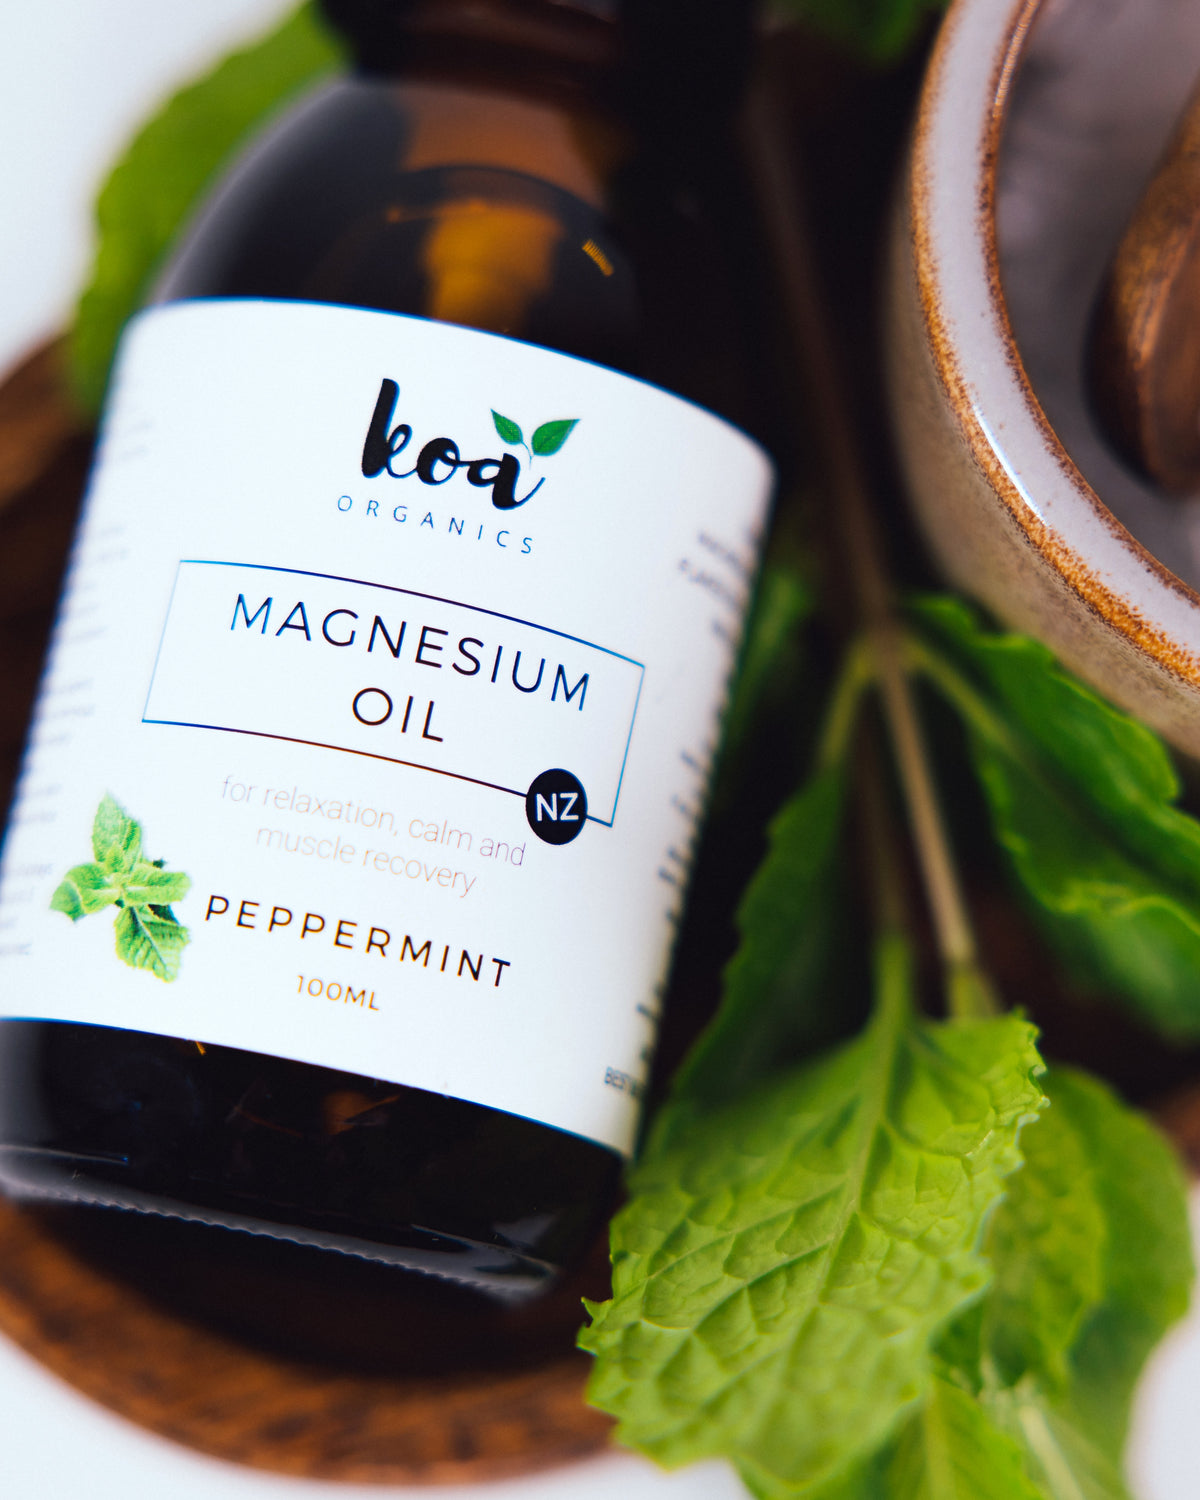 Magnesium Oil with Peppermint from Koa Organics